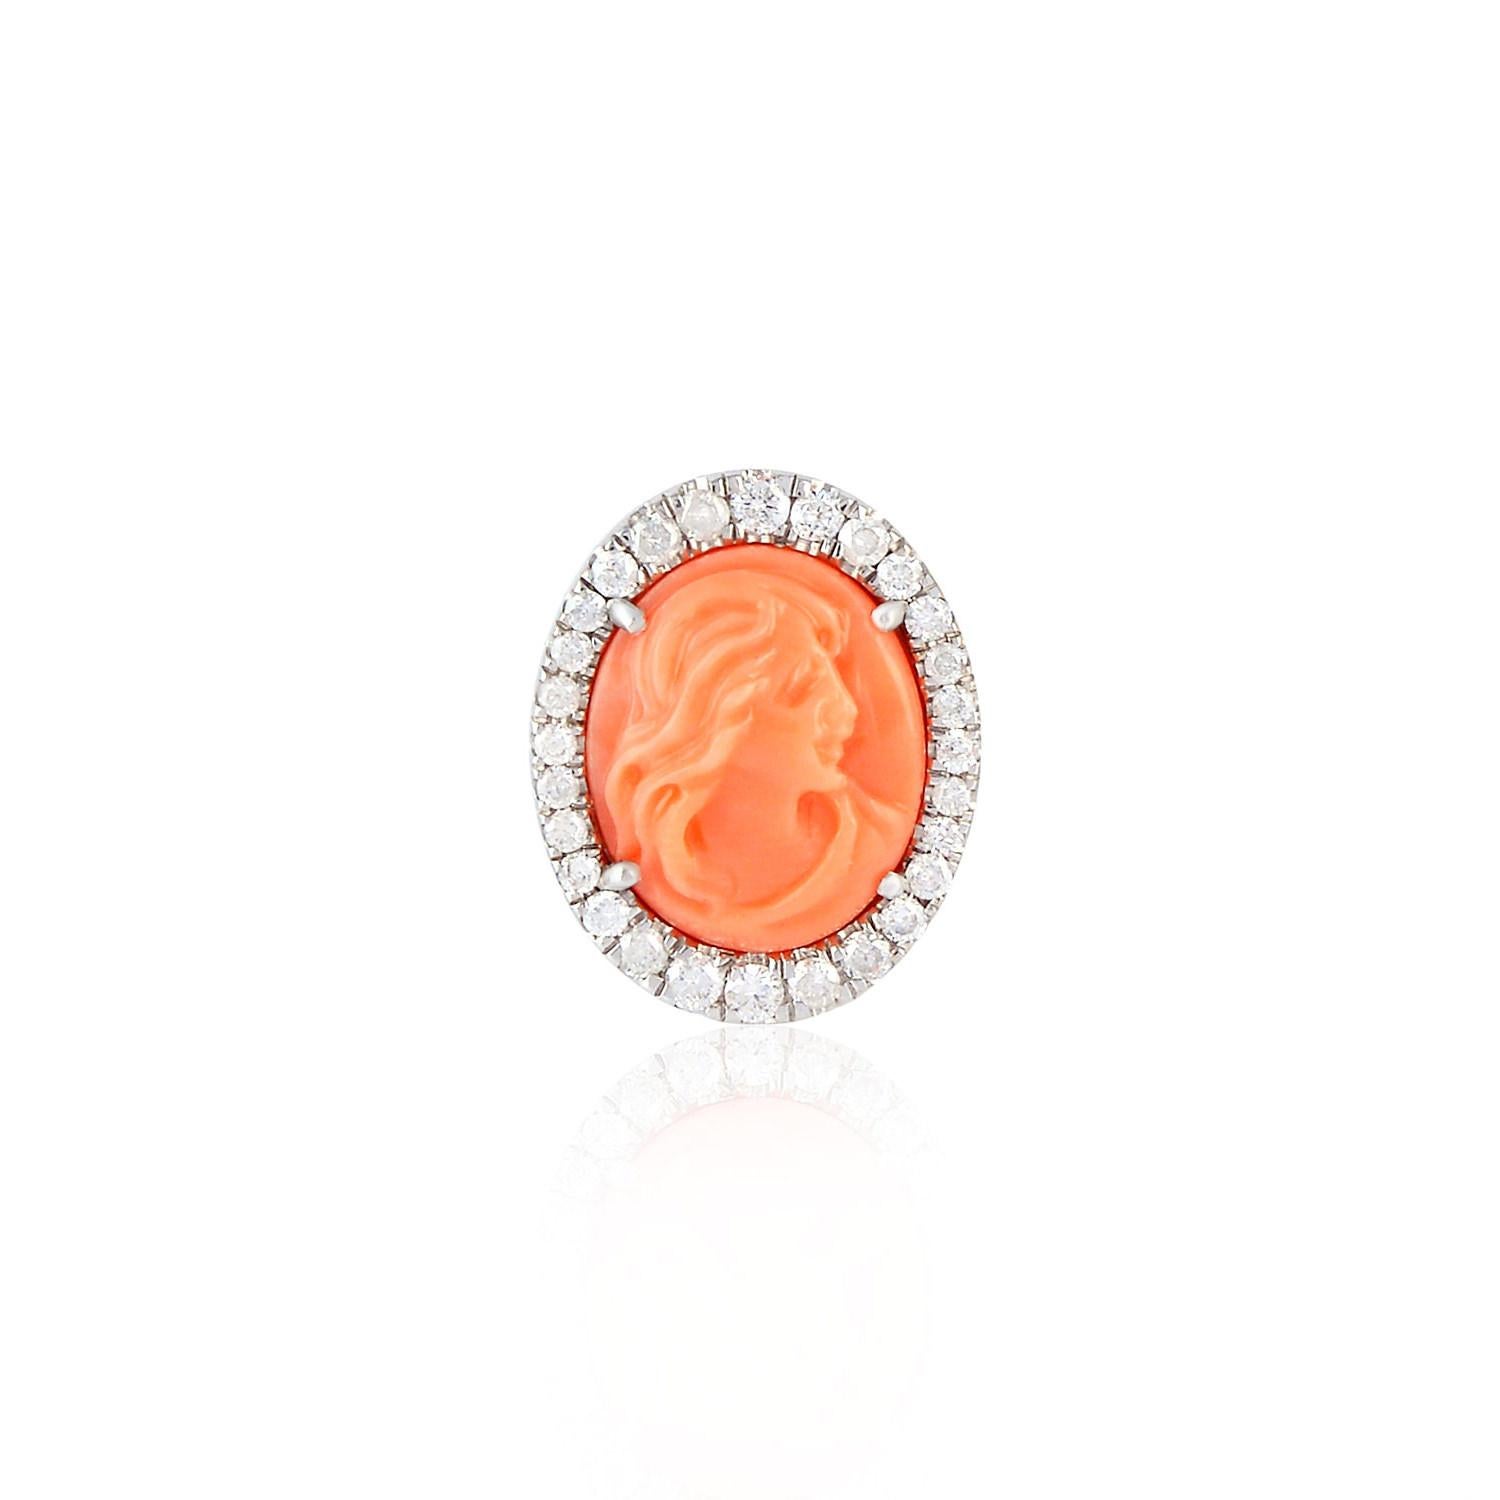 Mixed Cut Carved Coral Stud Earrings With Diamonds 7.34 Carats 18K Gold